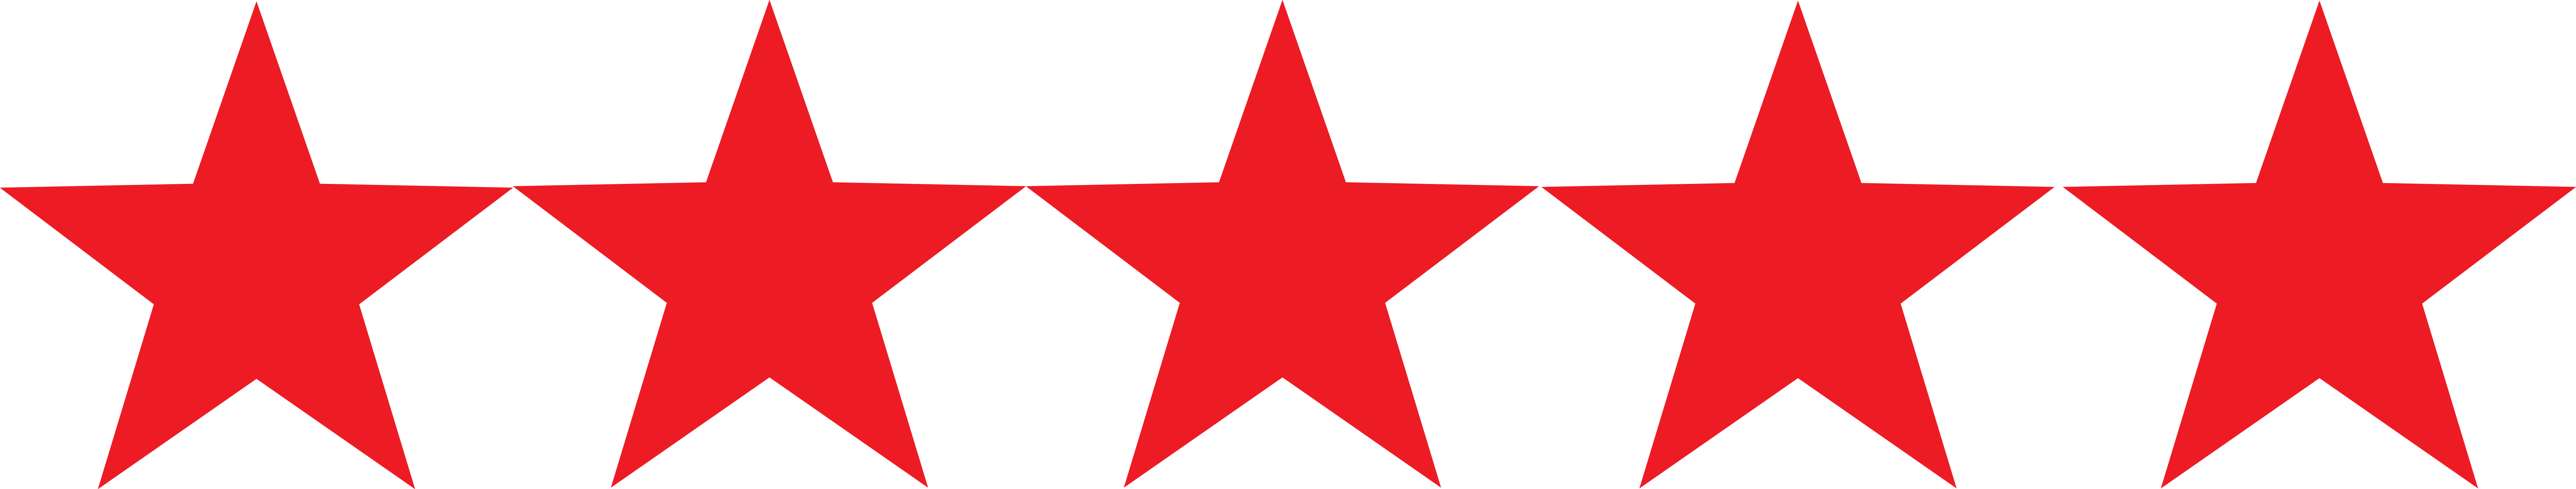 Image result for 5 star image red